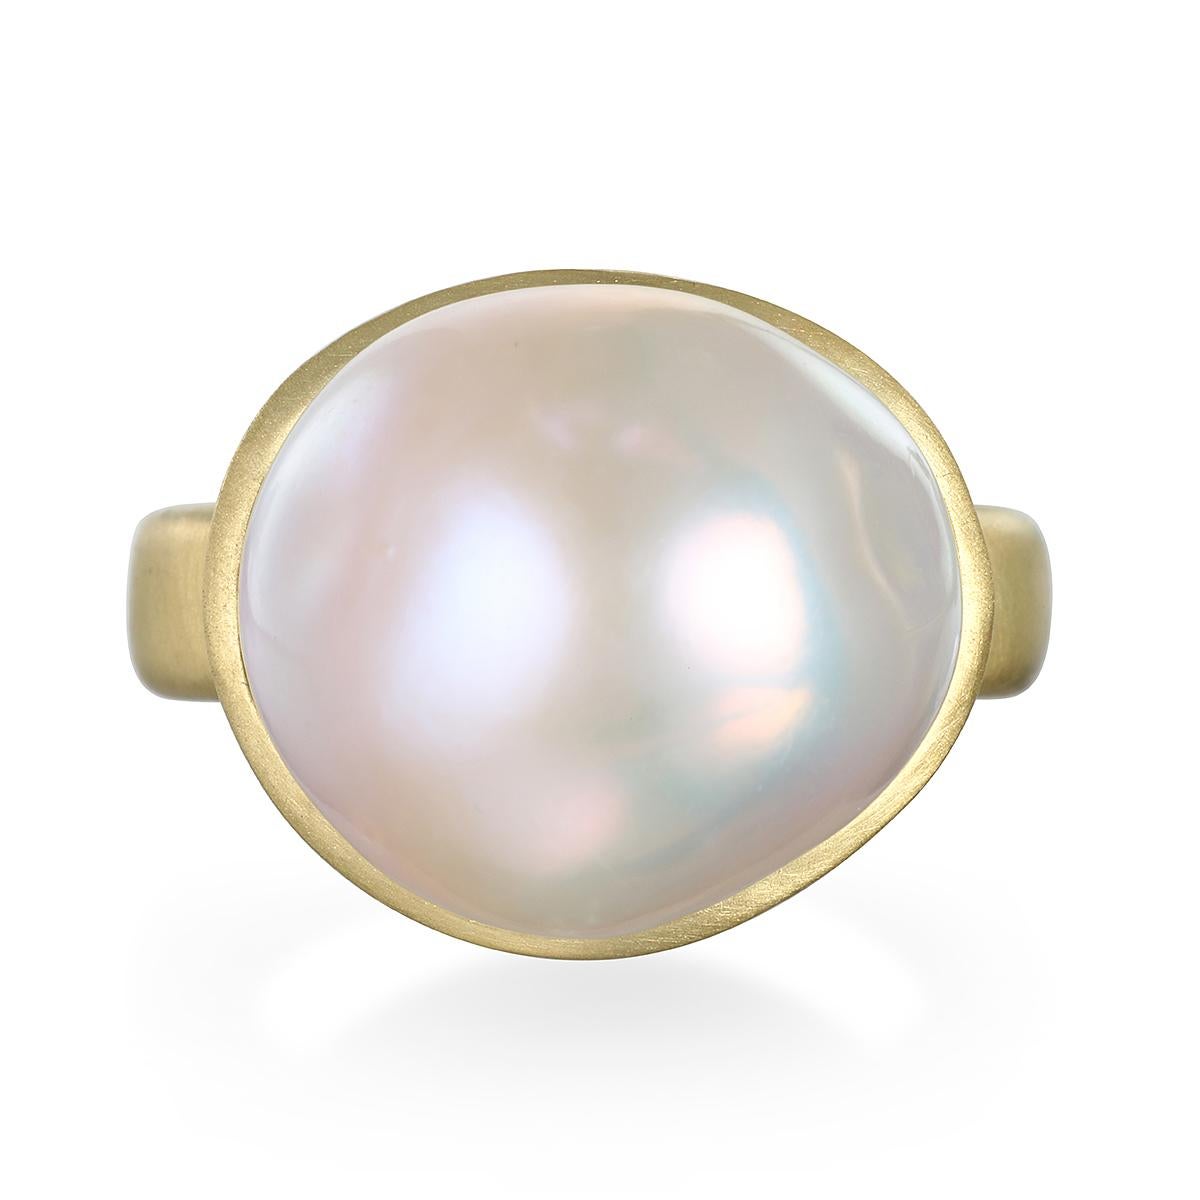 Faye Kim's 18 Karat Gold Cream Baroque Freshwater Pearl Ring is bezel set and highlights the classic beauty of pearls made wearable for today's contemporary styles.

Pearl: 17.5mm
Size: 7.5 (Can be resized)

Photos show variations on ring, all sold